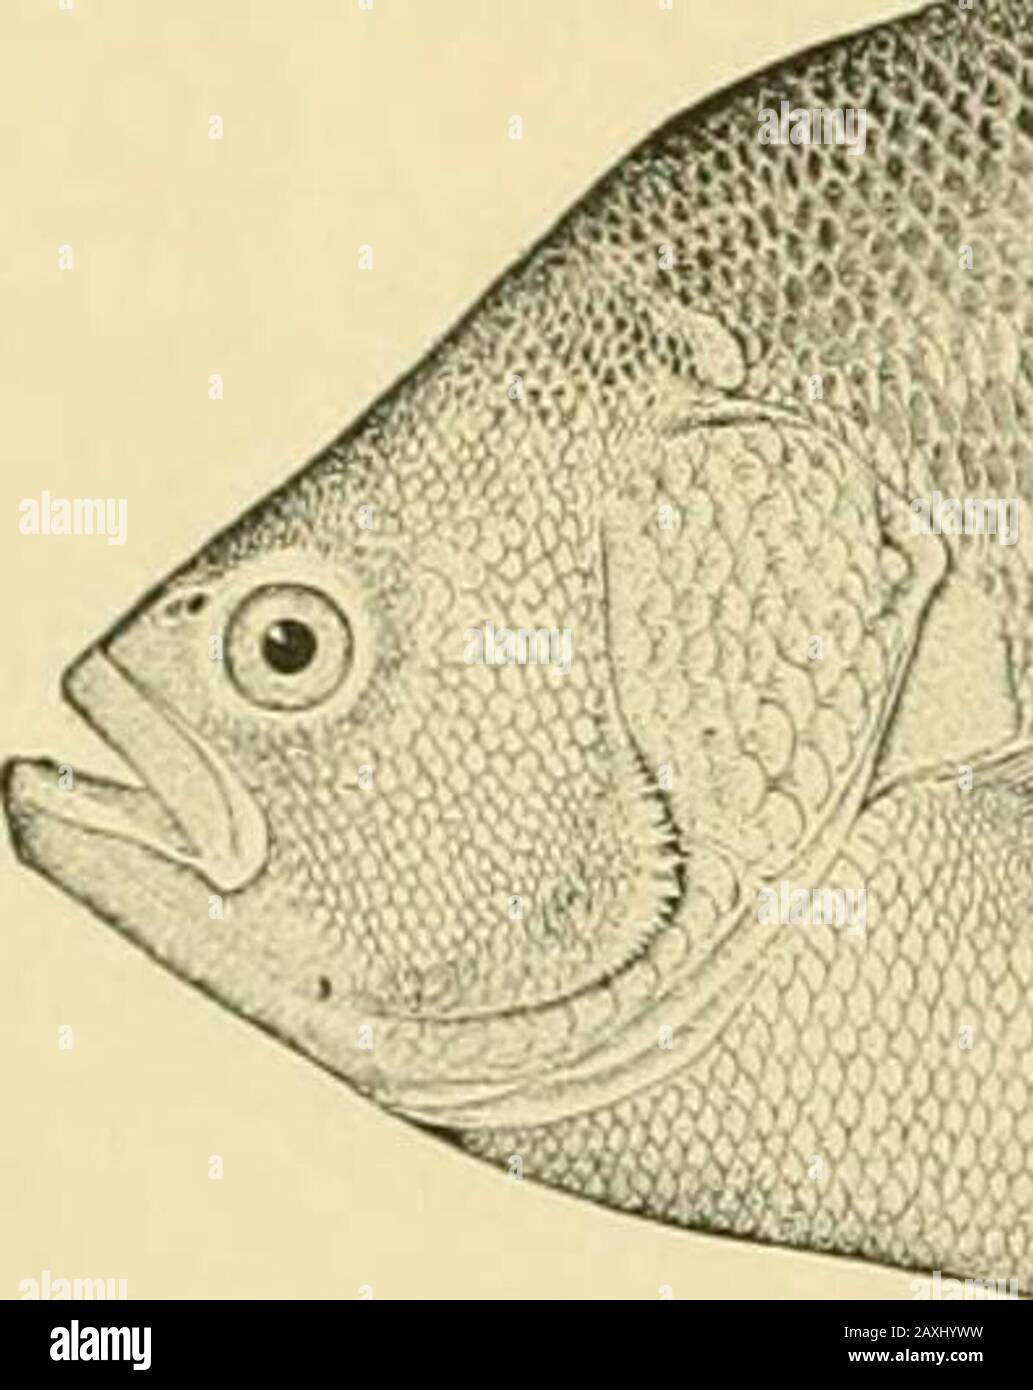 The food and game fishes of New York: . ° or 60Â° 1. At Woods Hole, Mass.,they are deposited in June. This is a valuable food fish, reaching a length of 18 inches and the weight of 6pounds. 414 SKVKXTII REPORT OK TIIK l-ORKST, ITSH AM) OAMK COMMISSION. 115. Flasher; Triple-tail (Lobotcs sKrinaiuciisis Bloch). Holocentrus SKriiiaiiiciisis Bloch, Ichth., pi. 243, 1790, Surinam. Bodianiis triiinis .MircHiLl., Tran.s. Lit. X: Pliil. Soc, I, 418, jil. Ill, fig. 10, 1815, Powles Hook, N. J.Lohotes auctorum GUnther, Cat. Fish. Brit. Mus., I, 338, 1859.Lobotes surinamensis Cuvier & Valenciennes, Hist. Stock Photo